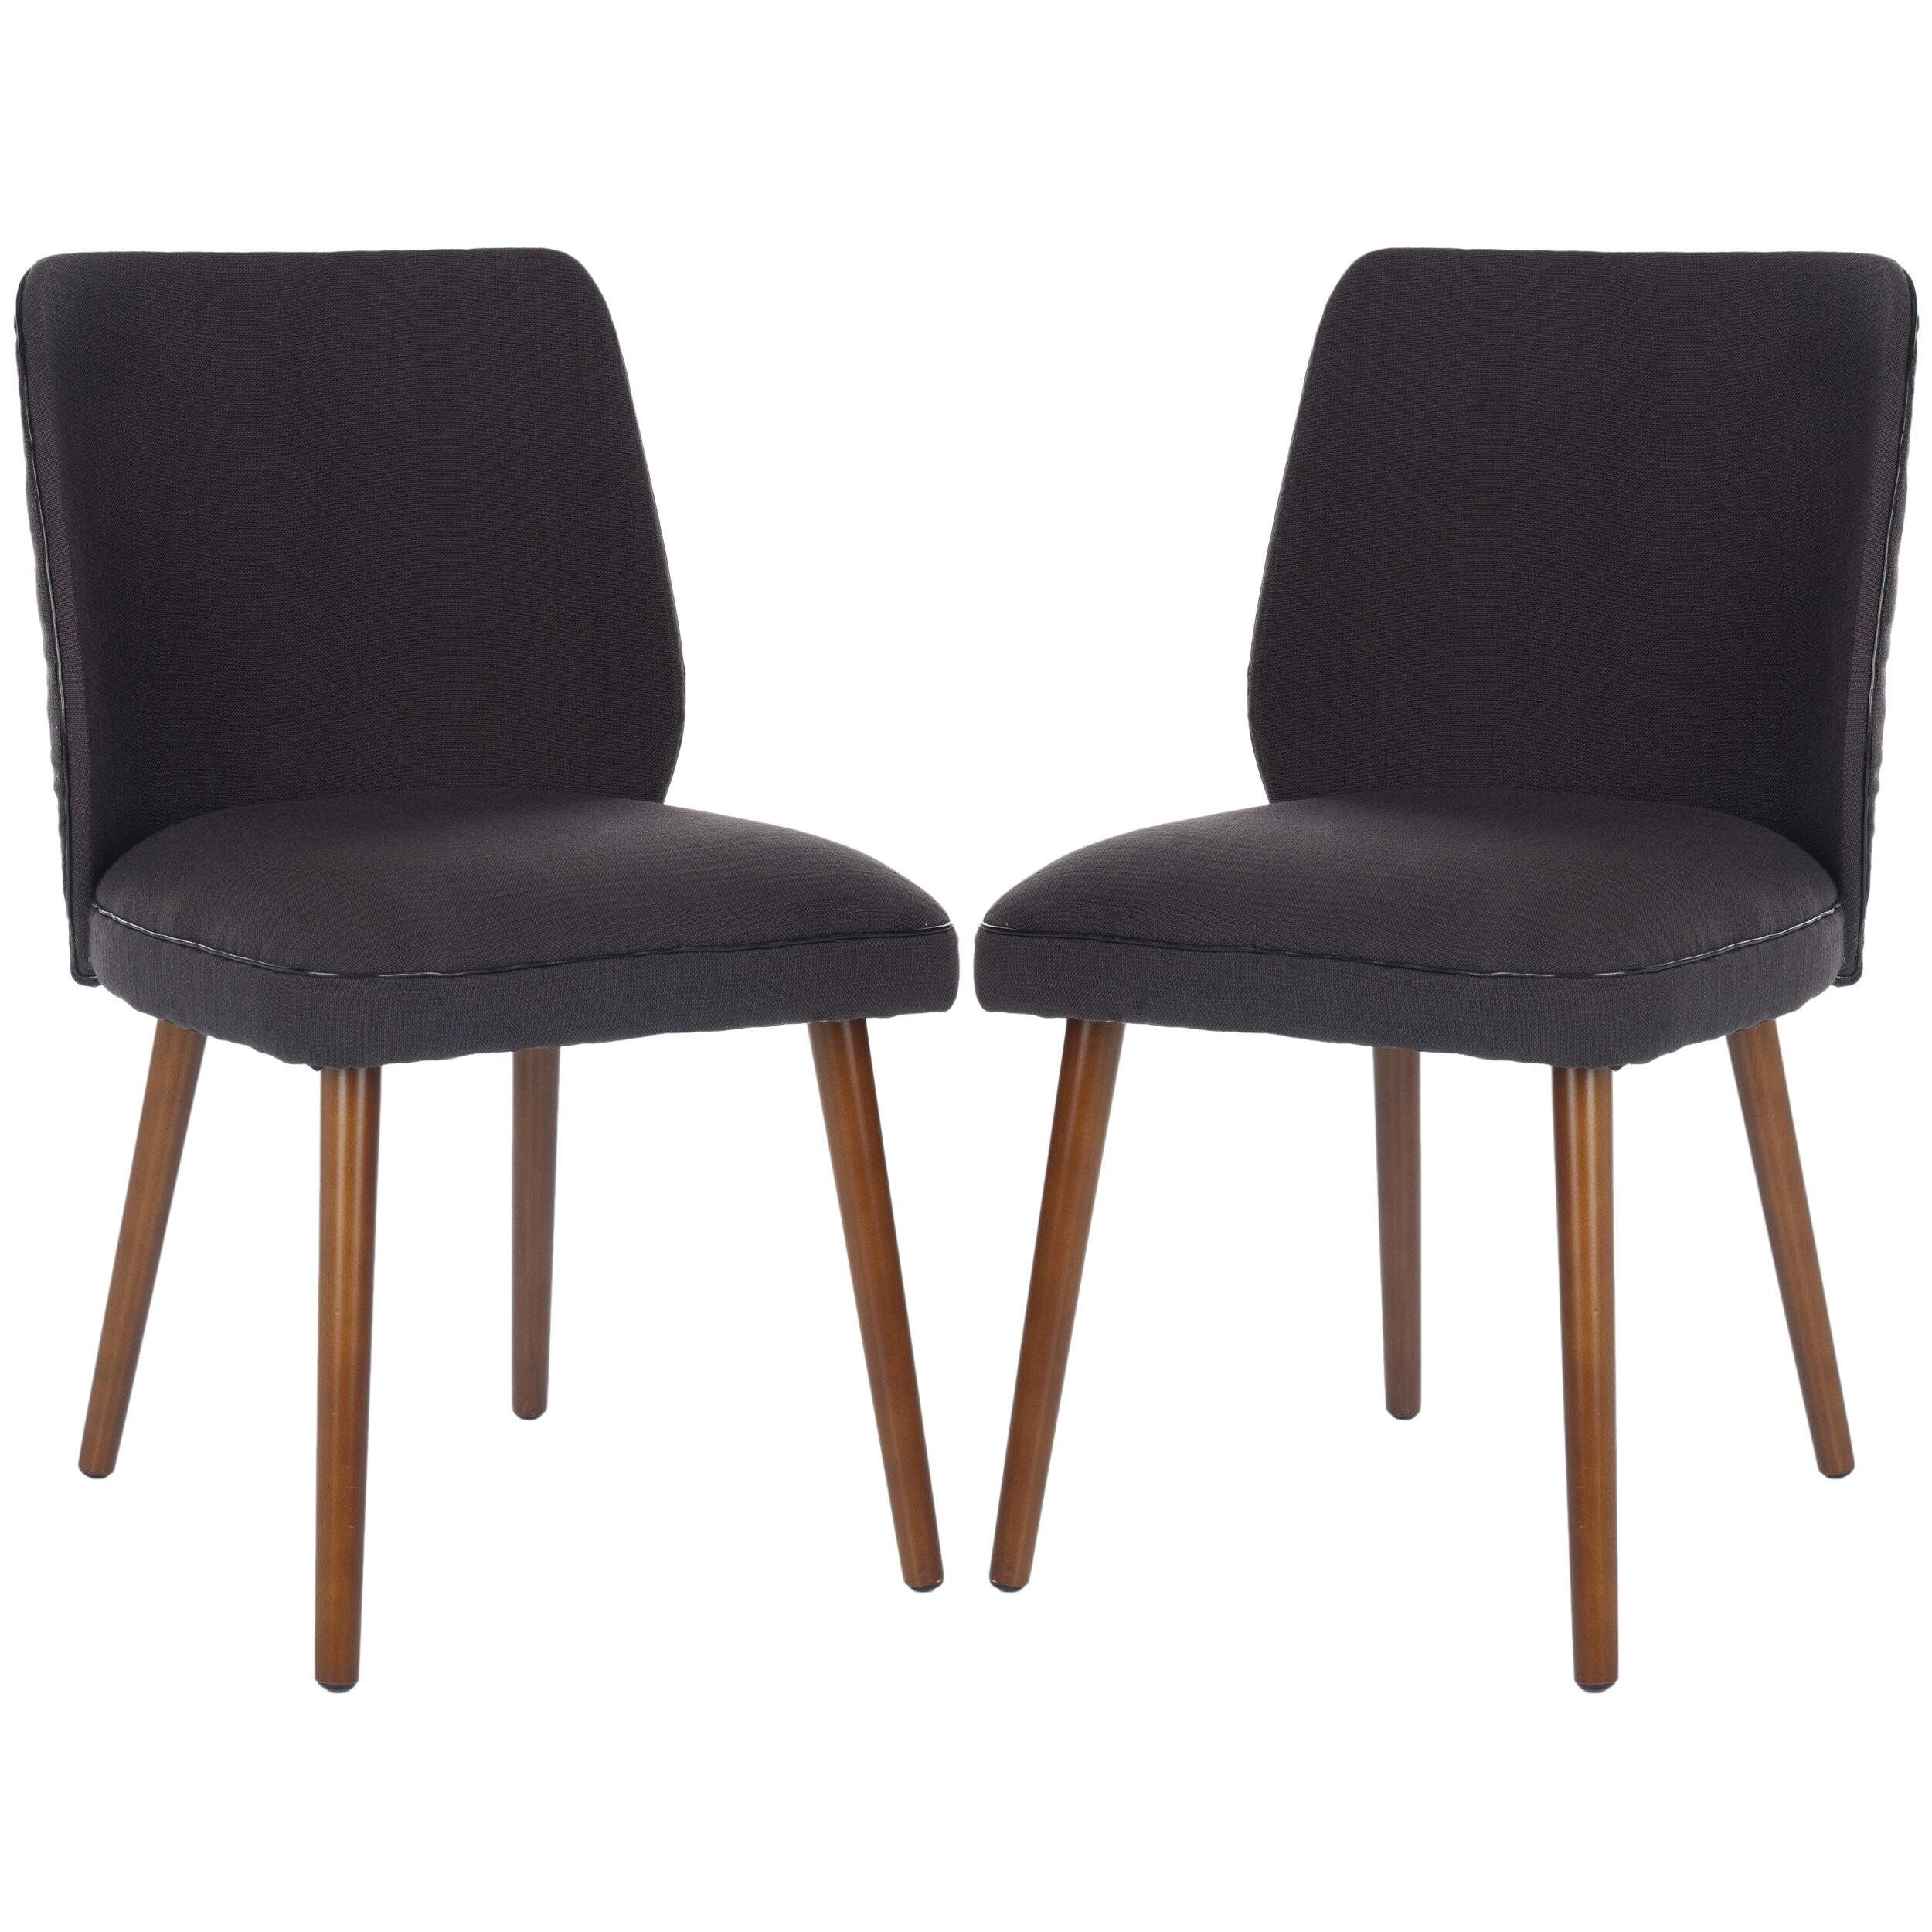 Safavieh Retro Brown Linen Blend Side Chairs (set Of 2) (BrownMaterials Wood, linen/cotton blend fabricFinish Dark walnutSeat dimensions 18.5 inches wide x 17.7 inches deepSeat height 18.5 inchesDimensions 31.1 inches high x 18.1 inches wide x 22.9 i